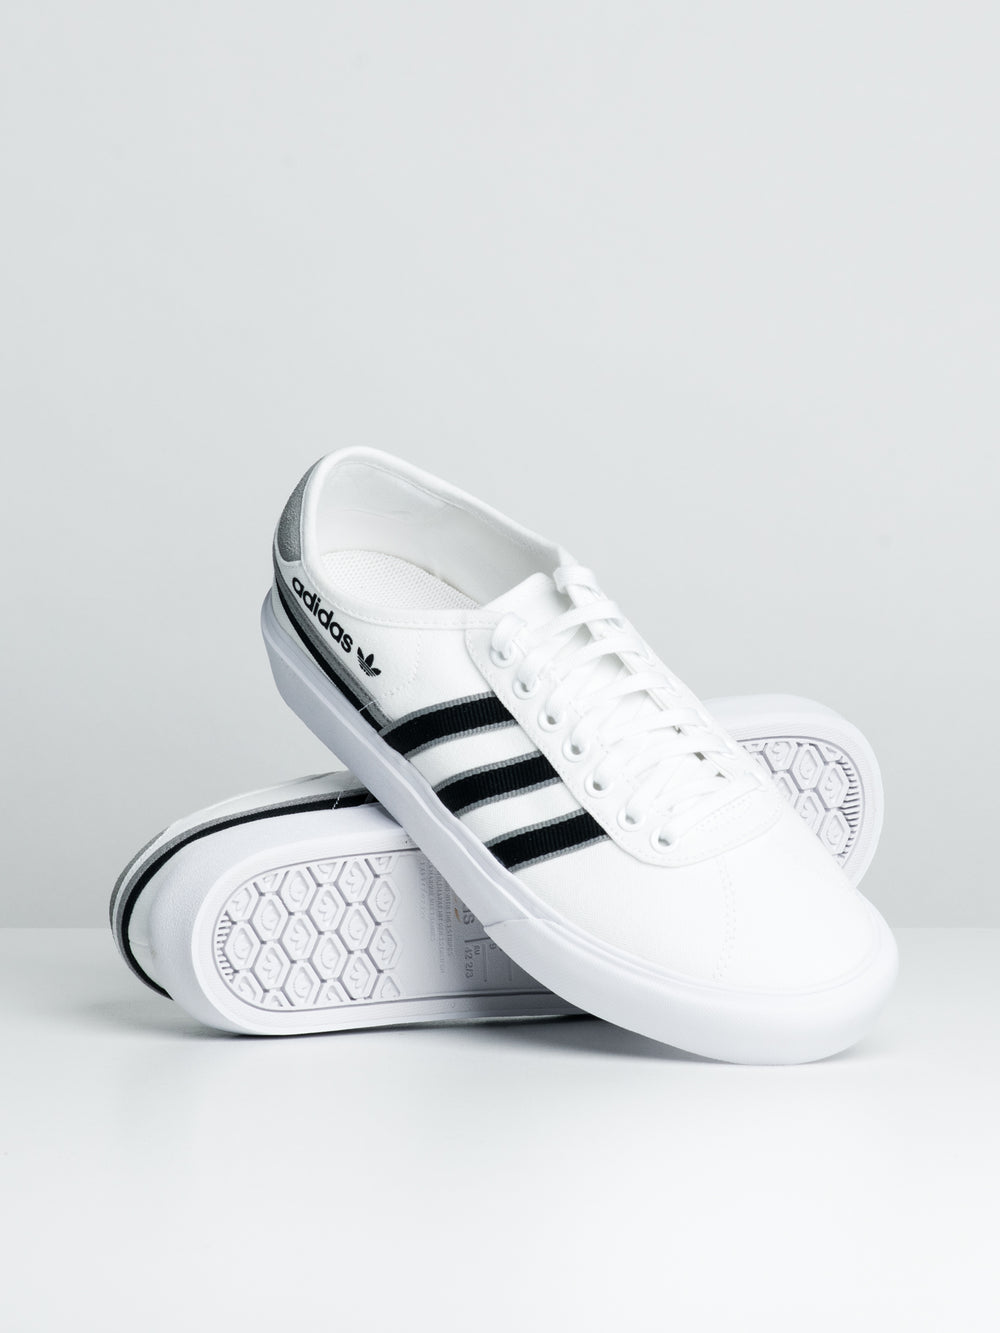 MENS ADIDAS DELPALA SNEAKERS- WHITE - CLEARANCE